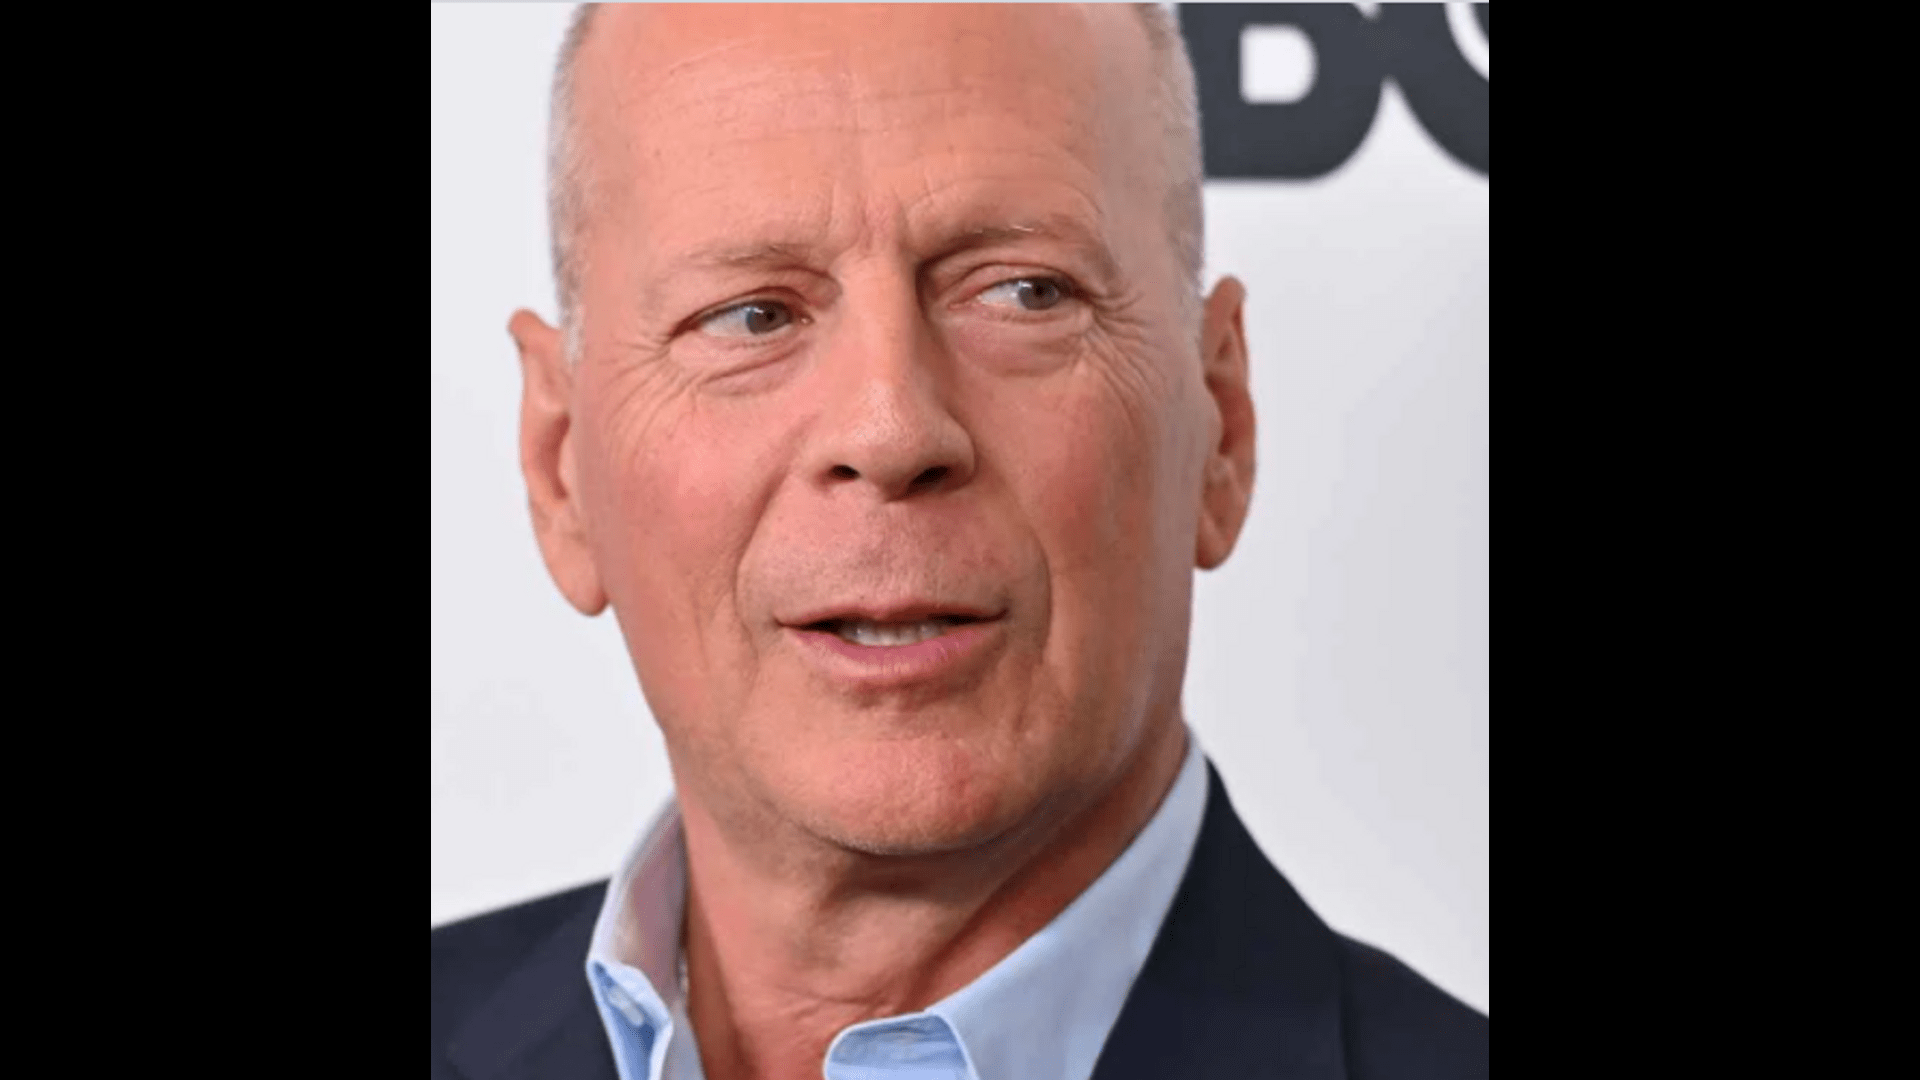 the-razzies-consider-removing-the-special-category-they-created-for-bruce-willis-after-his-diagnosis-of-aphasia